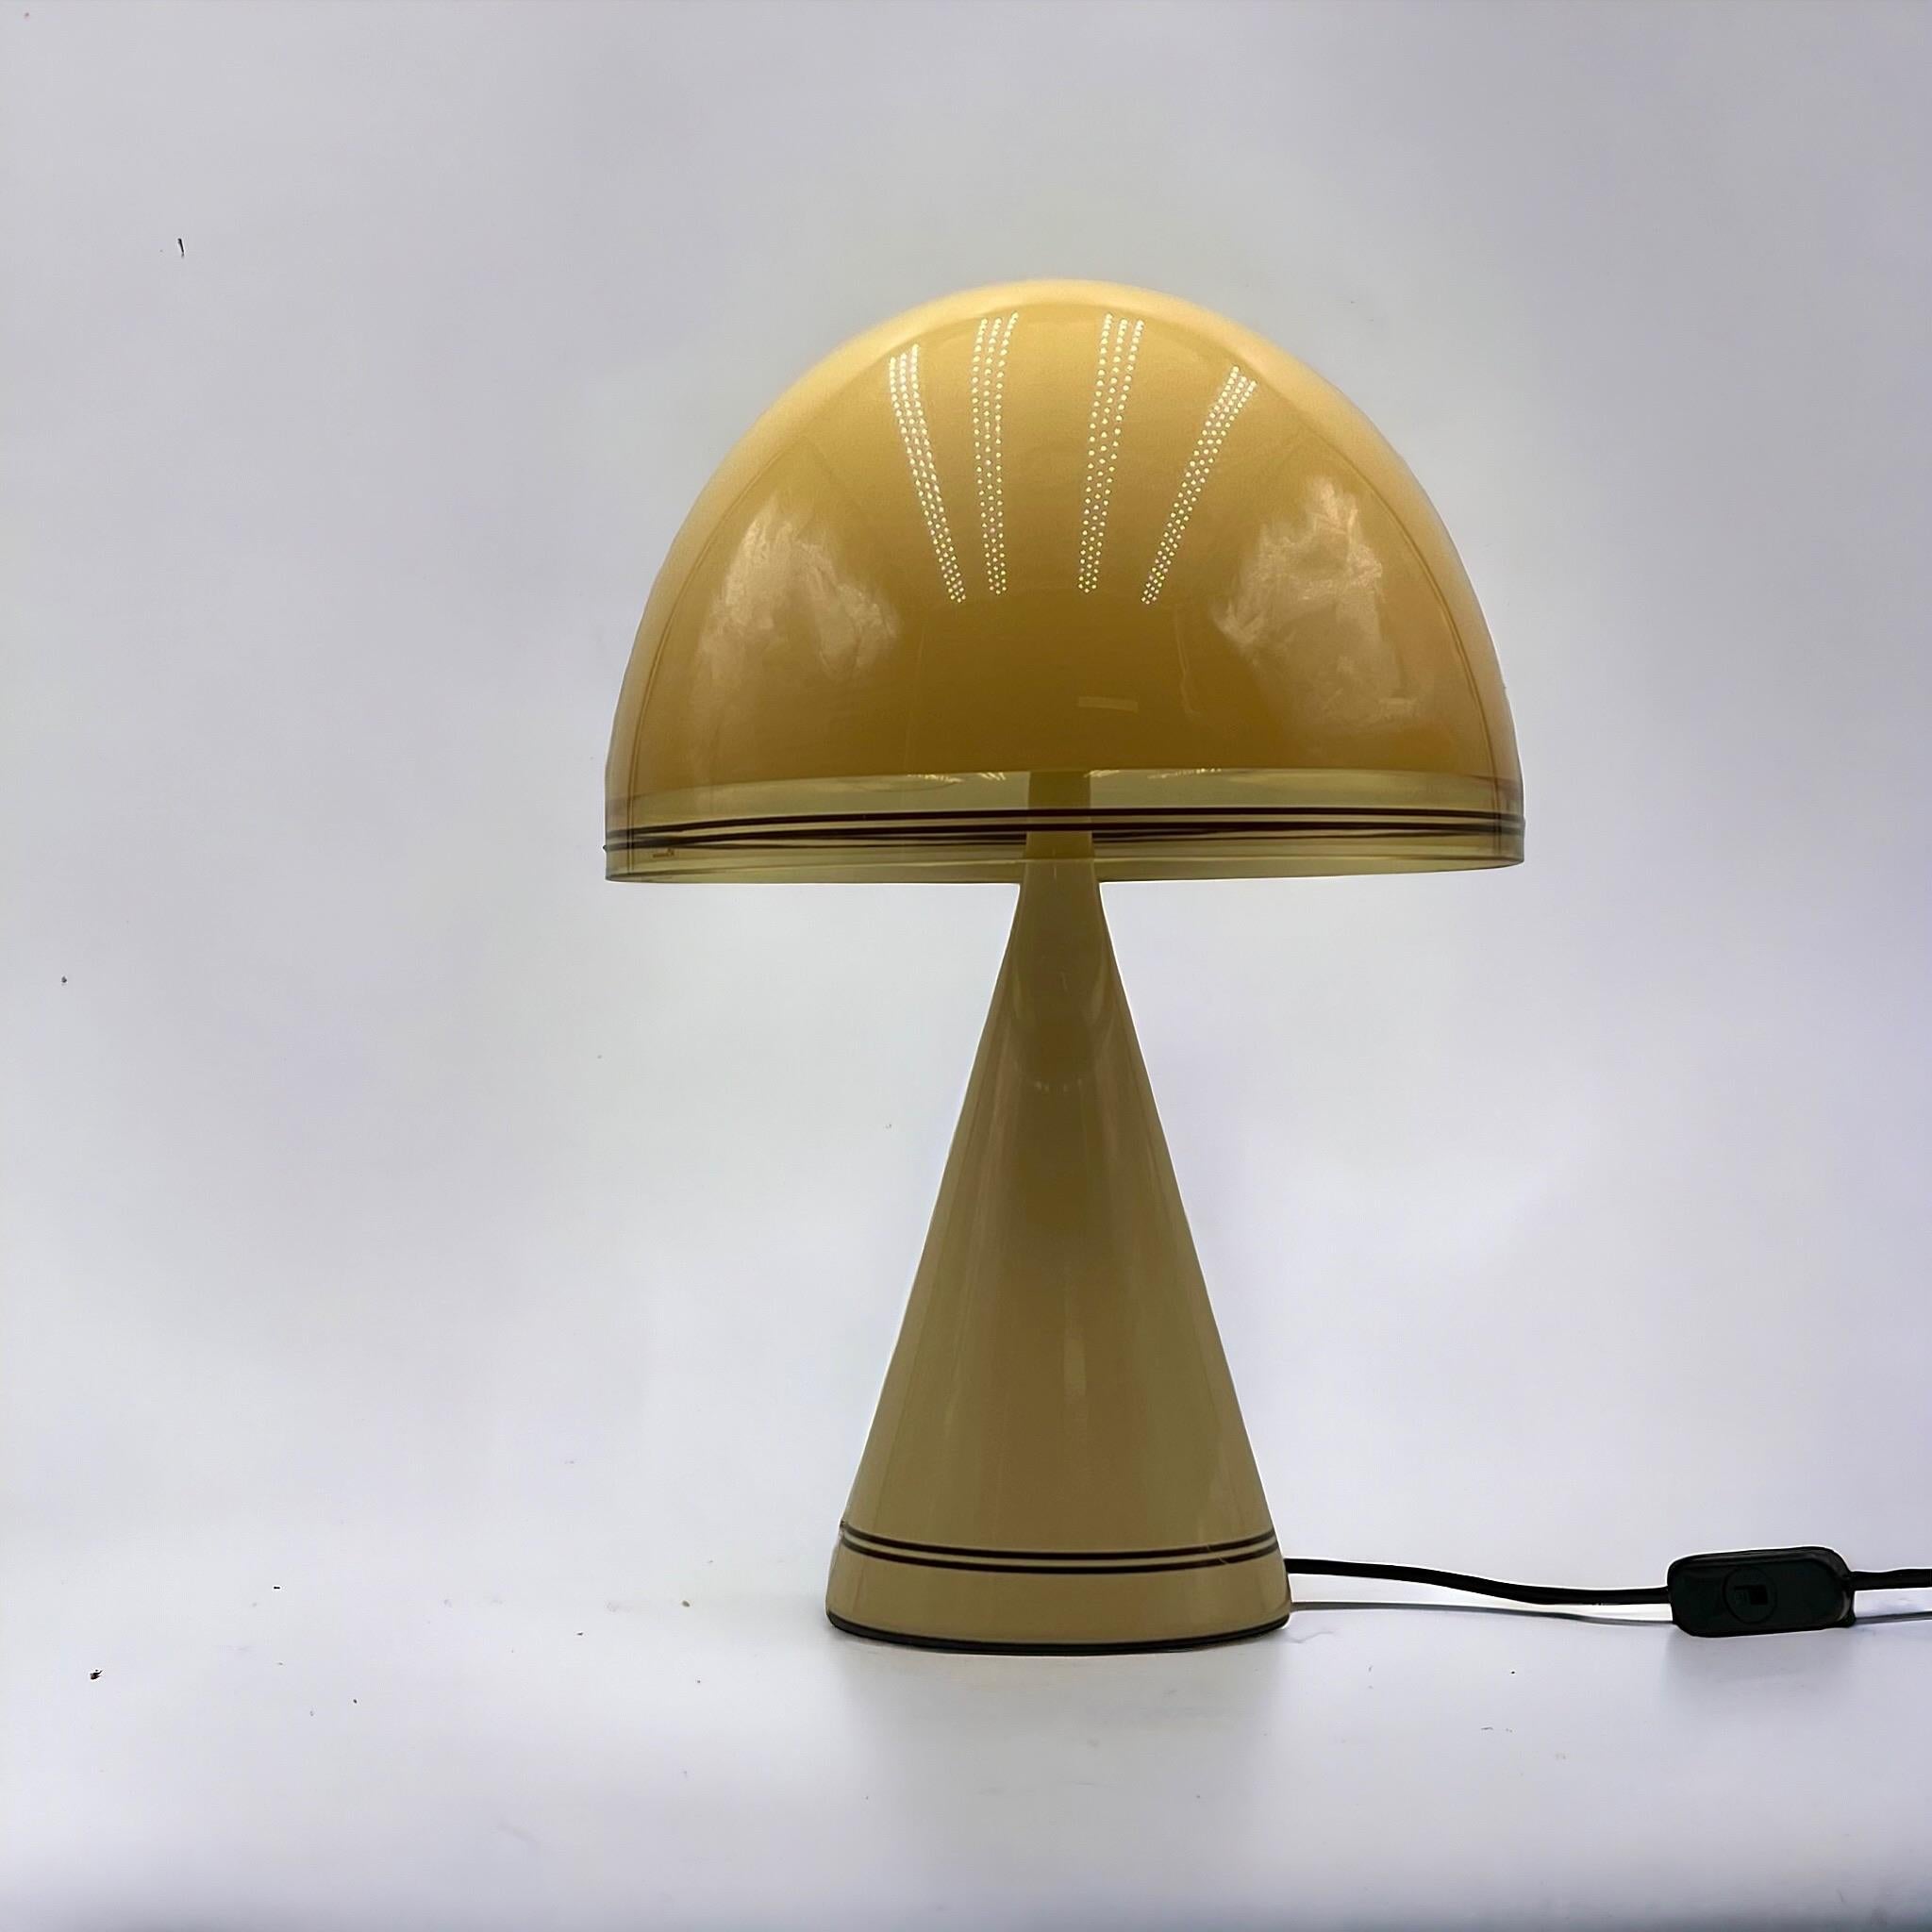 Industrial Iconic Mushroom 70s Lamp ‘Baobab’ by iGuzzini - Italian Space Age Iconic Lamp For Sale